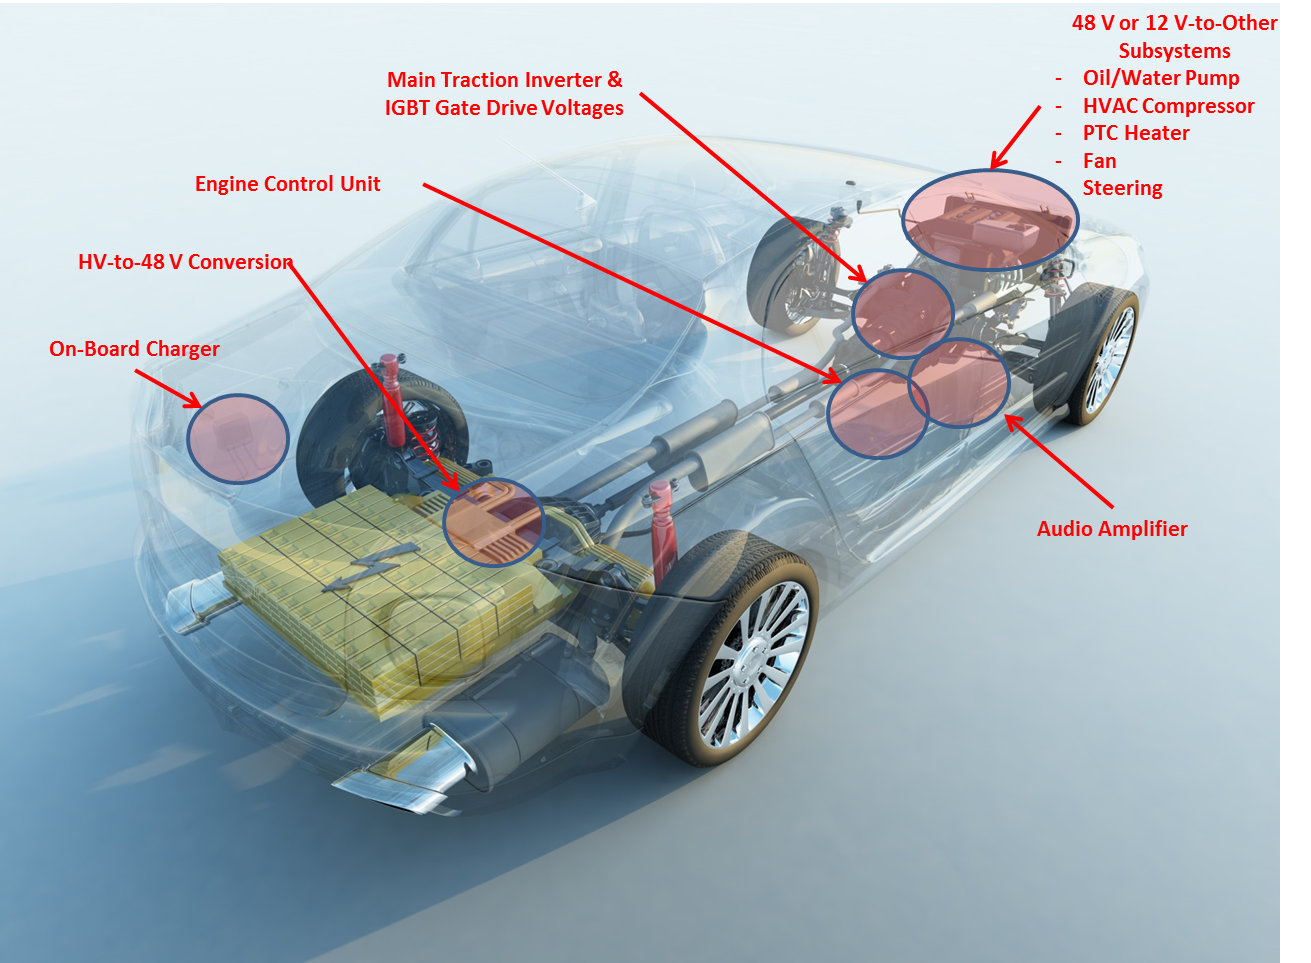 Hybrid electric vehicles and electric vehicles need different isolated